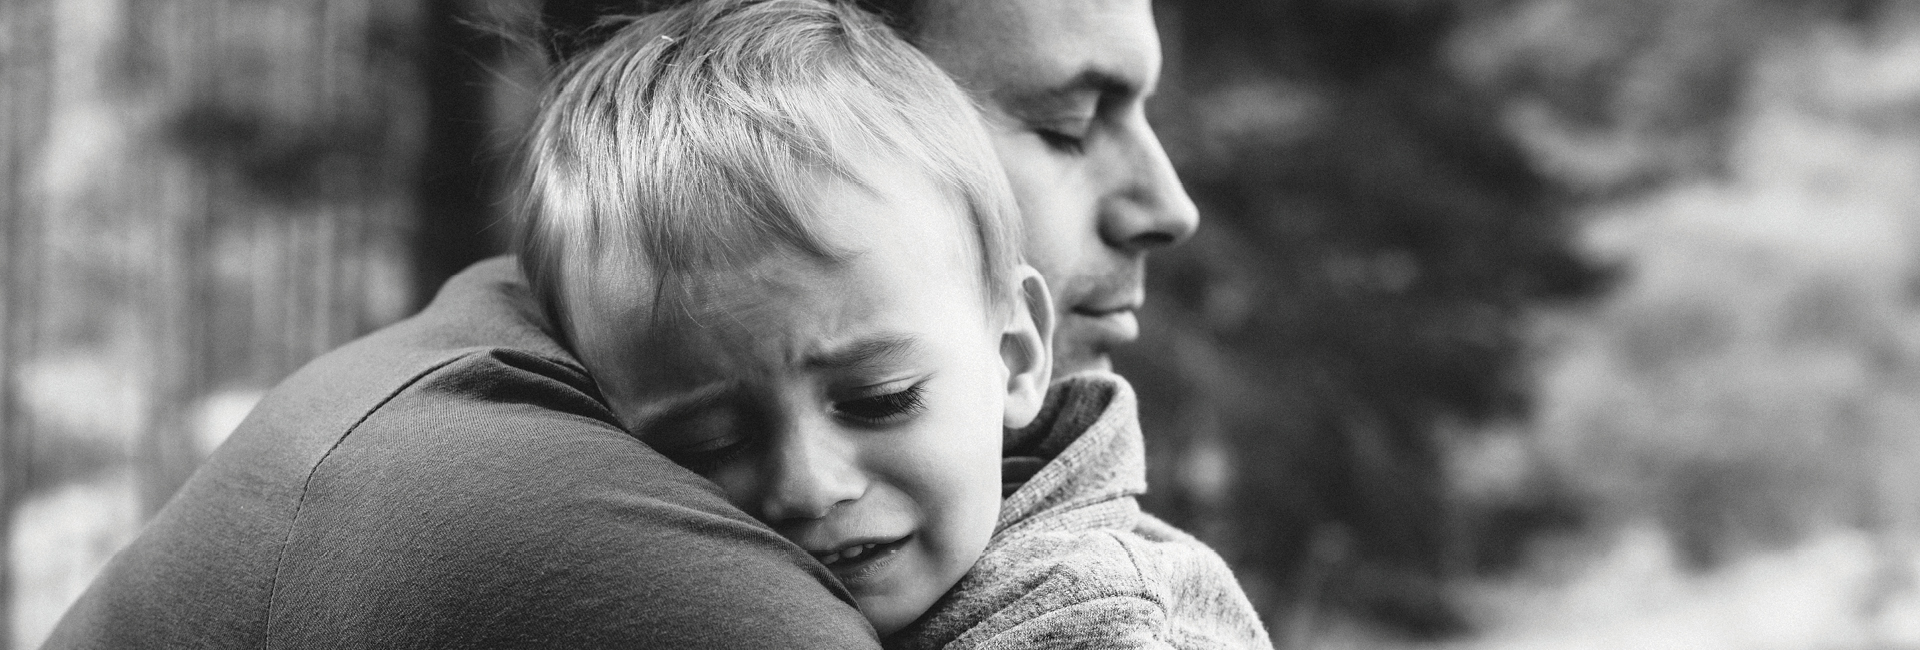 A father hugs a young child